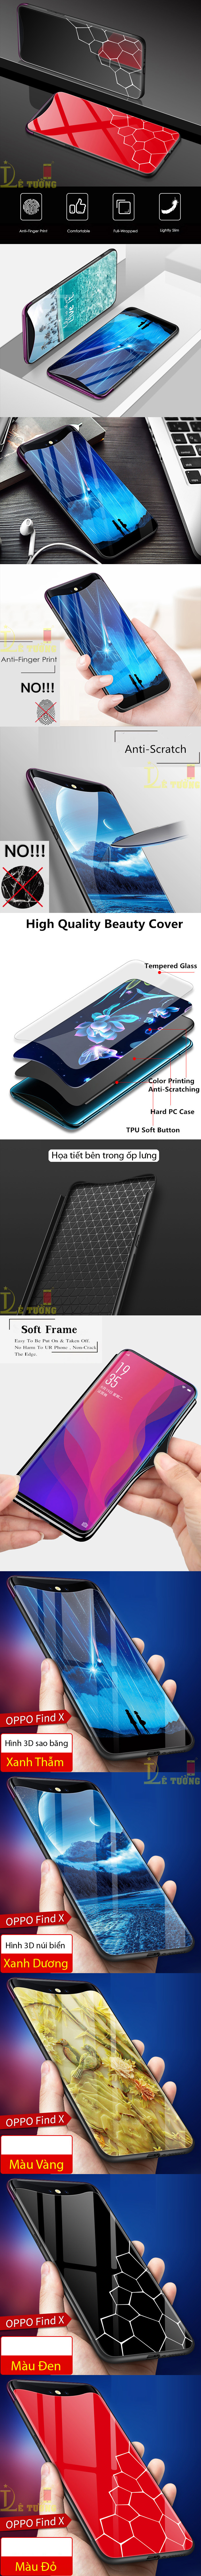 op-lung-oppo-find-x-lt-glass-case-9h-in-hinh-3d-tuyet-dep-15.jpg